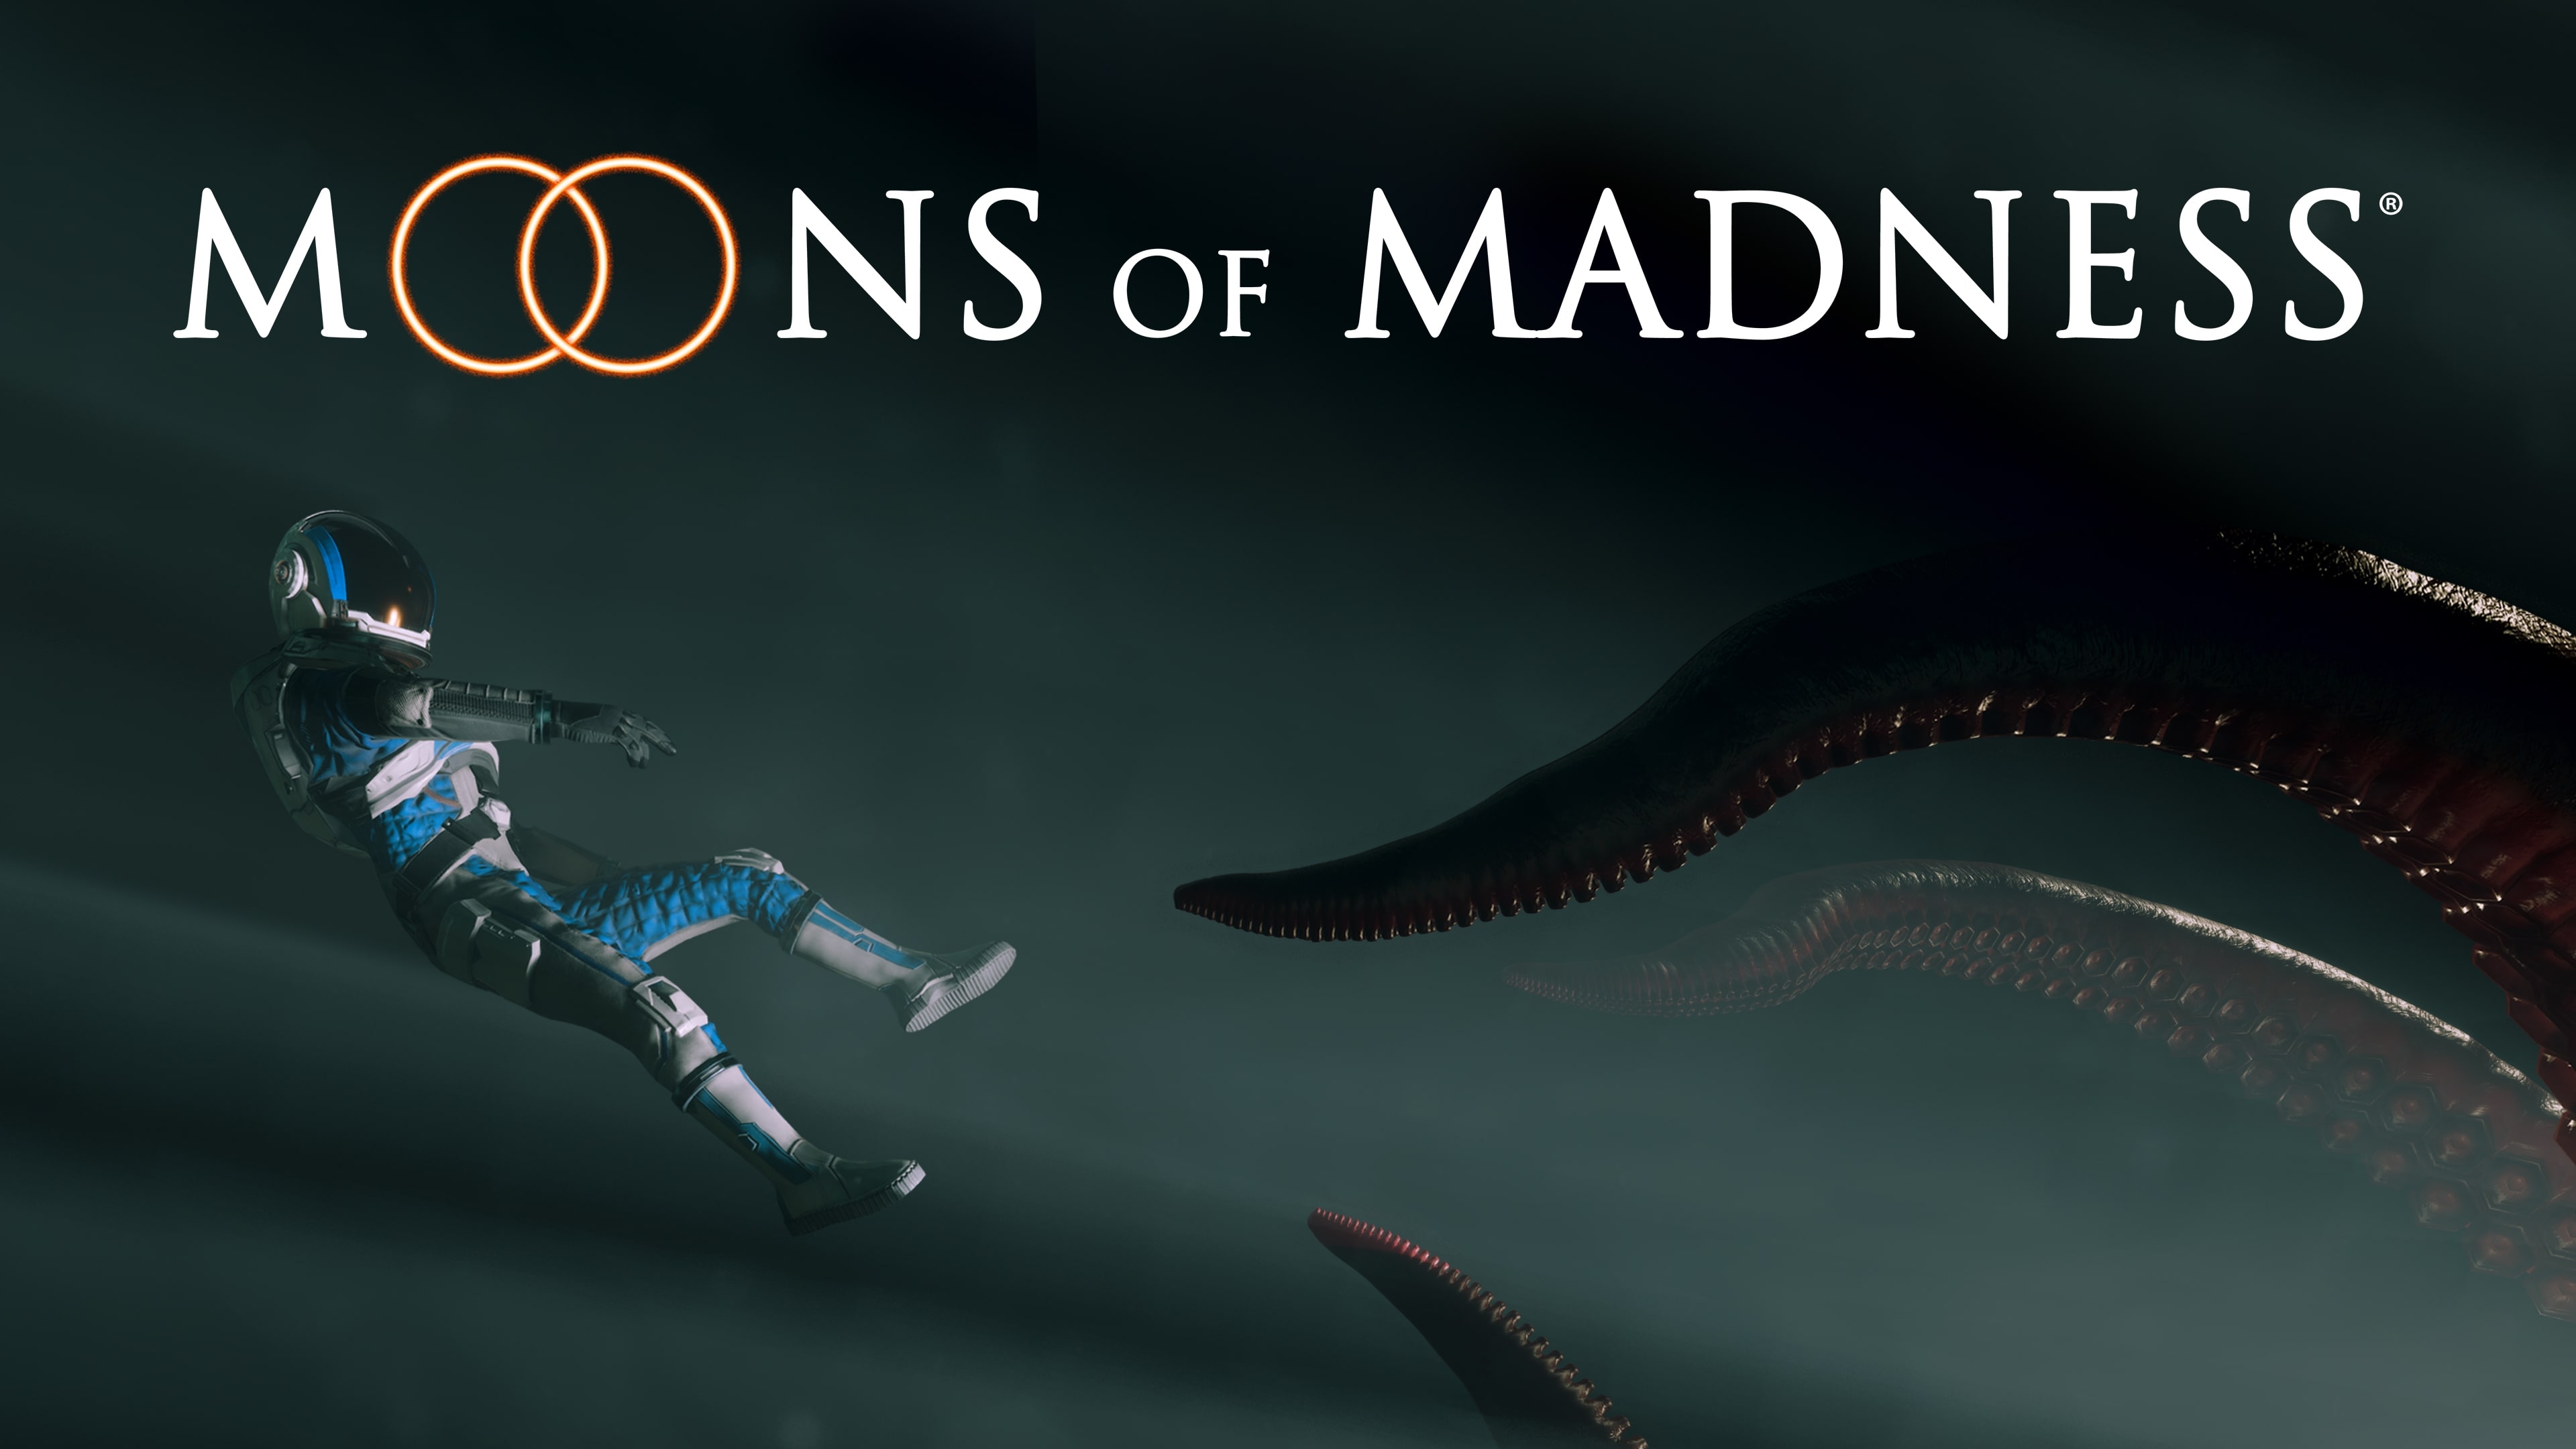 moons of madness steam download